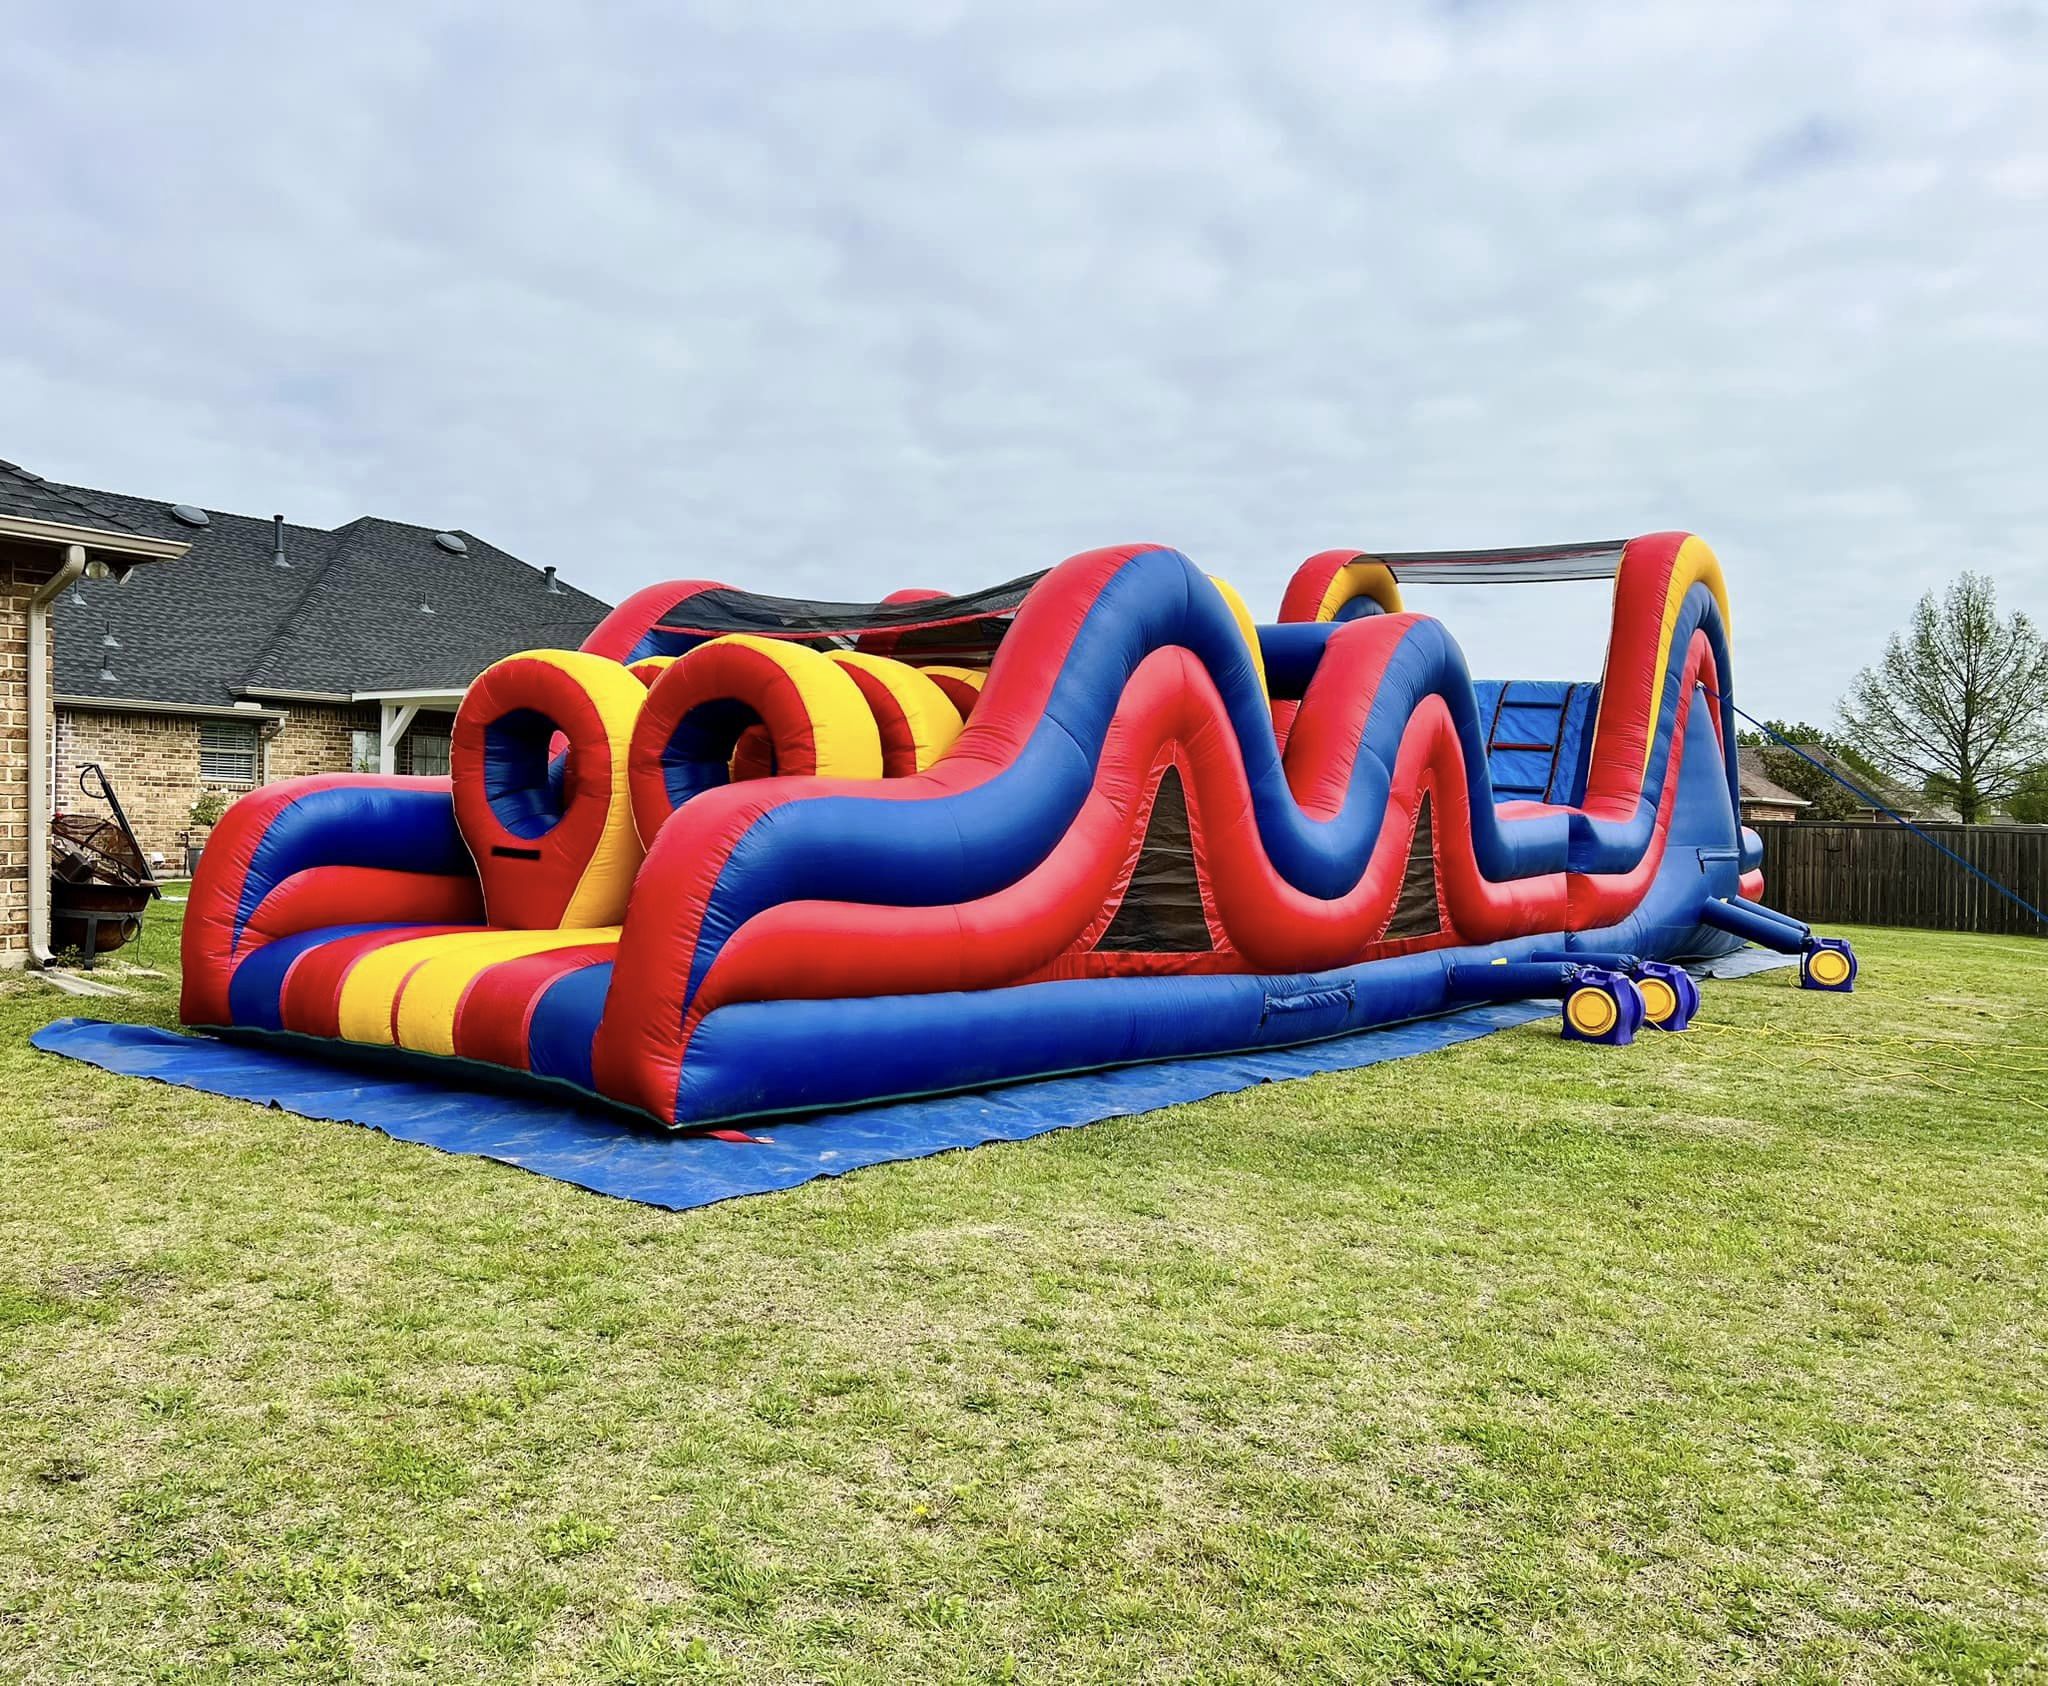 Inflatable Obstacle Course Bounce House, Commercial Race Obstacles Bounce Castle With Inflatable Slide For Outdoor Backyard